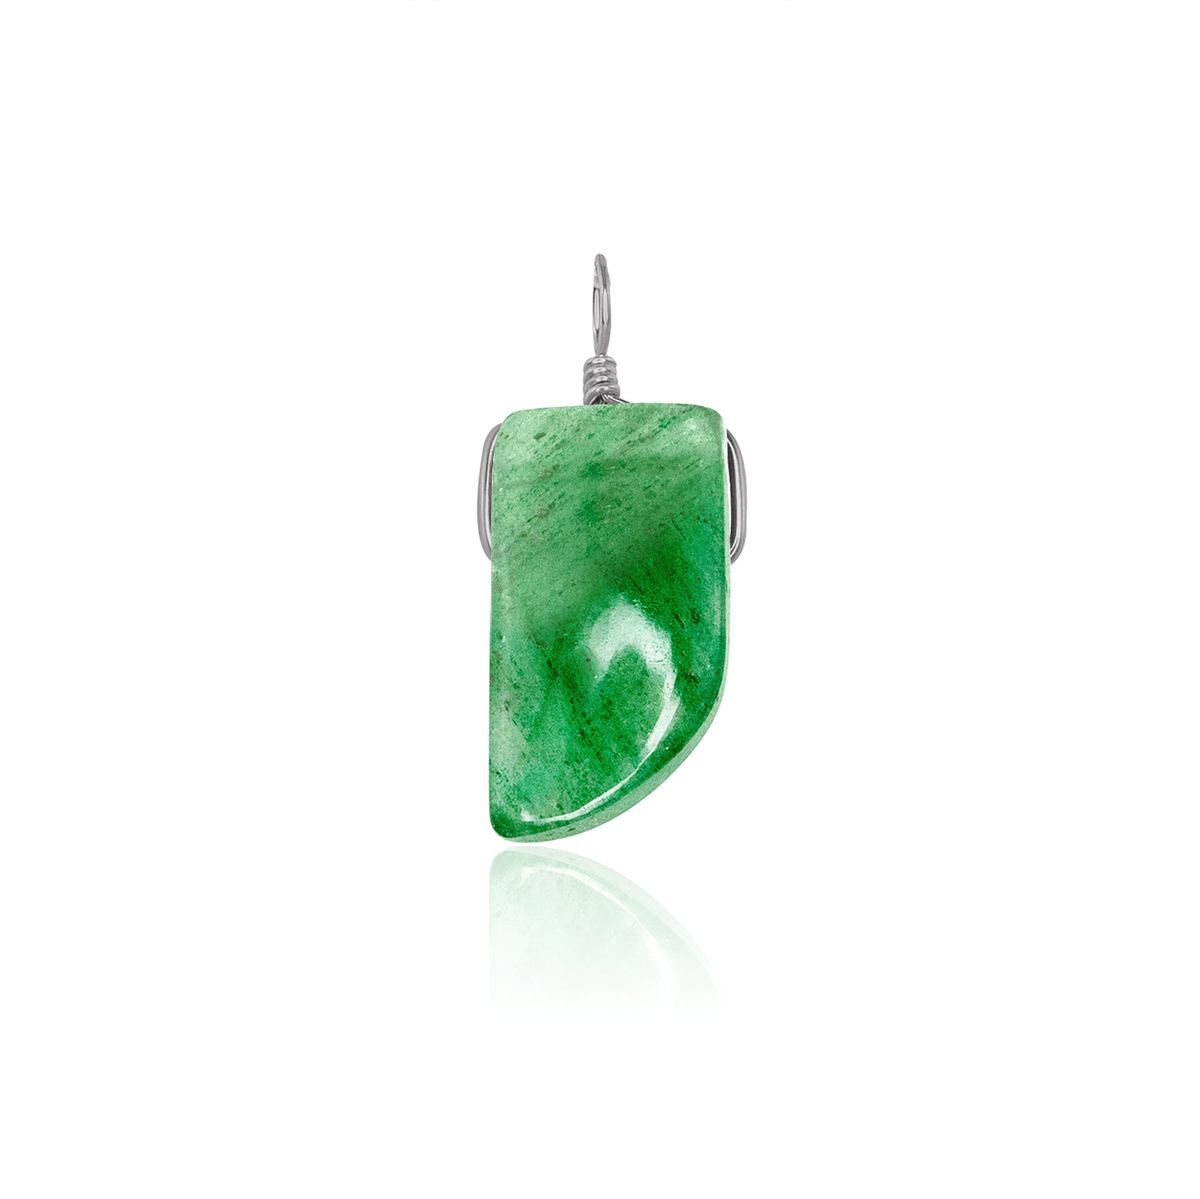 Small Smooth Aventurine Crystal Pendant with Gentle Point - Small Smooth Aventurine Crystal Pendant with Gentle Point - Stainless Steel - Luna Tide Handmade Crystal Jewellery